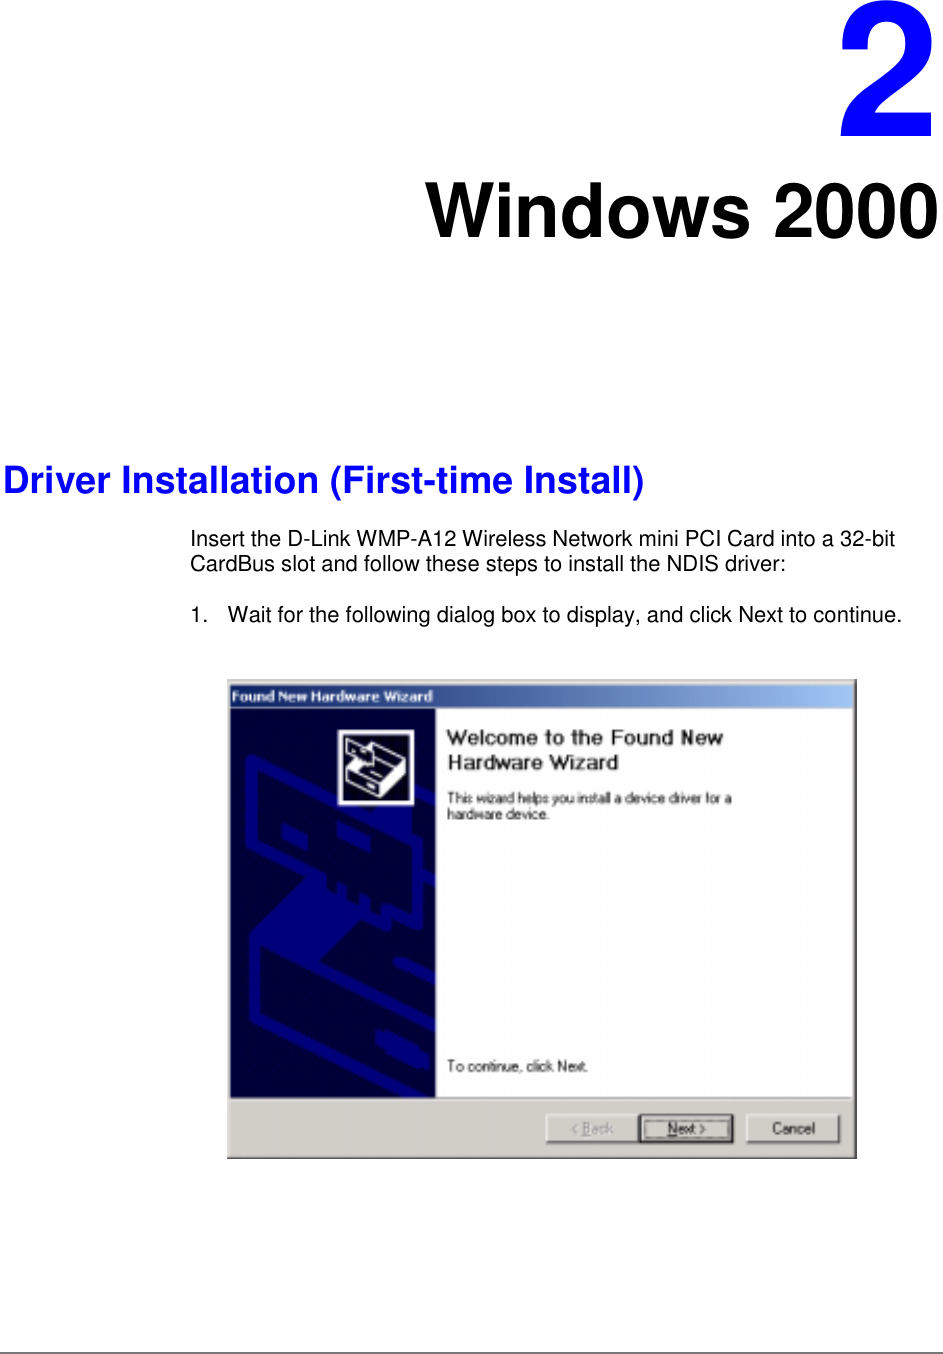 2Windows 2000Driver Installation (First-time Install)Insert the D-Link WMP-A12 Wireless Network mini PCI Card into a 32-bitCardBus slot and follow these steps to install the NDIS driver:1.  Wait for the following dialog box to display, and click Next to continue.